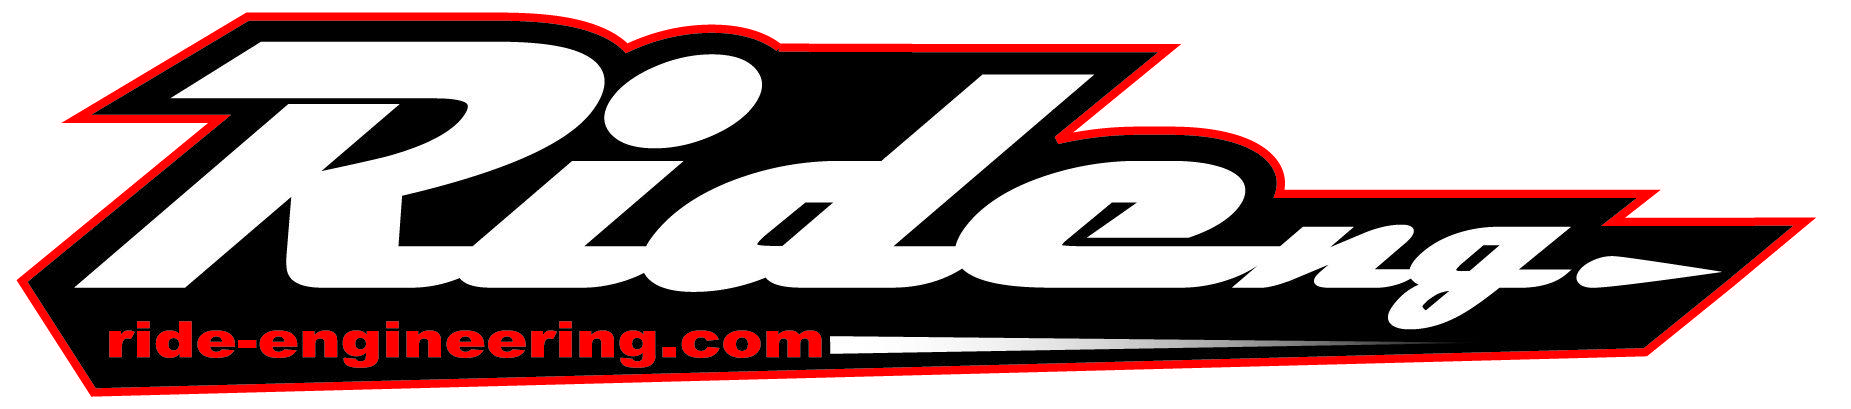 The Ride Logo - image and Logos Engineering, Inc